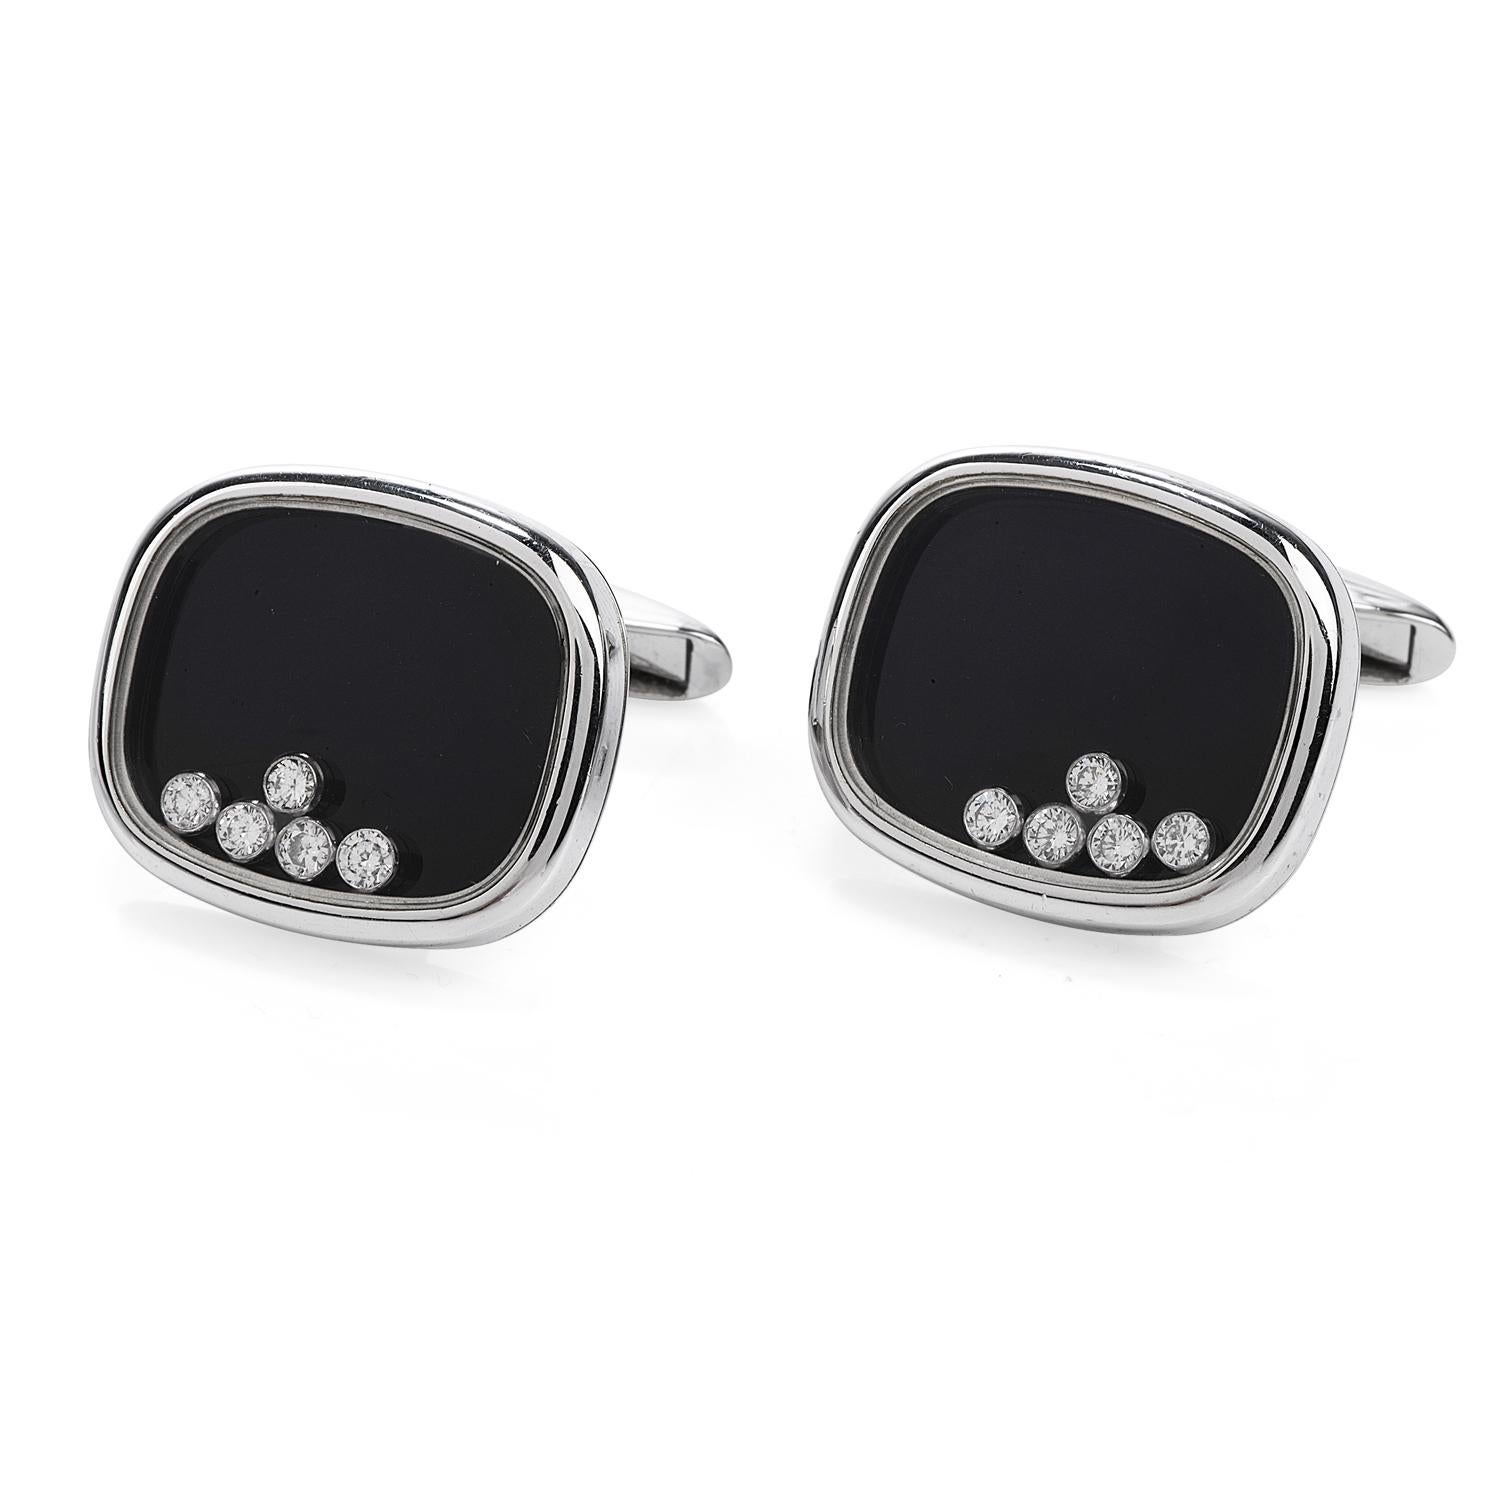 These classic Tuxedo Cushion Shaped Cufflinks are crafted in Solid 18K White Gold. 

With a Black Onyx Dial, Covered with Glass.

The main attraction for these pieces are the 10 Round Cut, Bezel set, 

Floating Diamonds, 

with a total carat weight